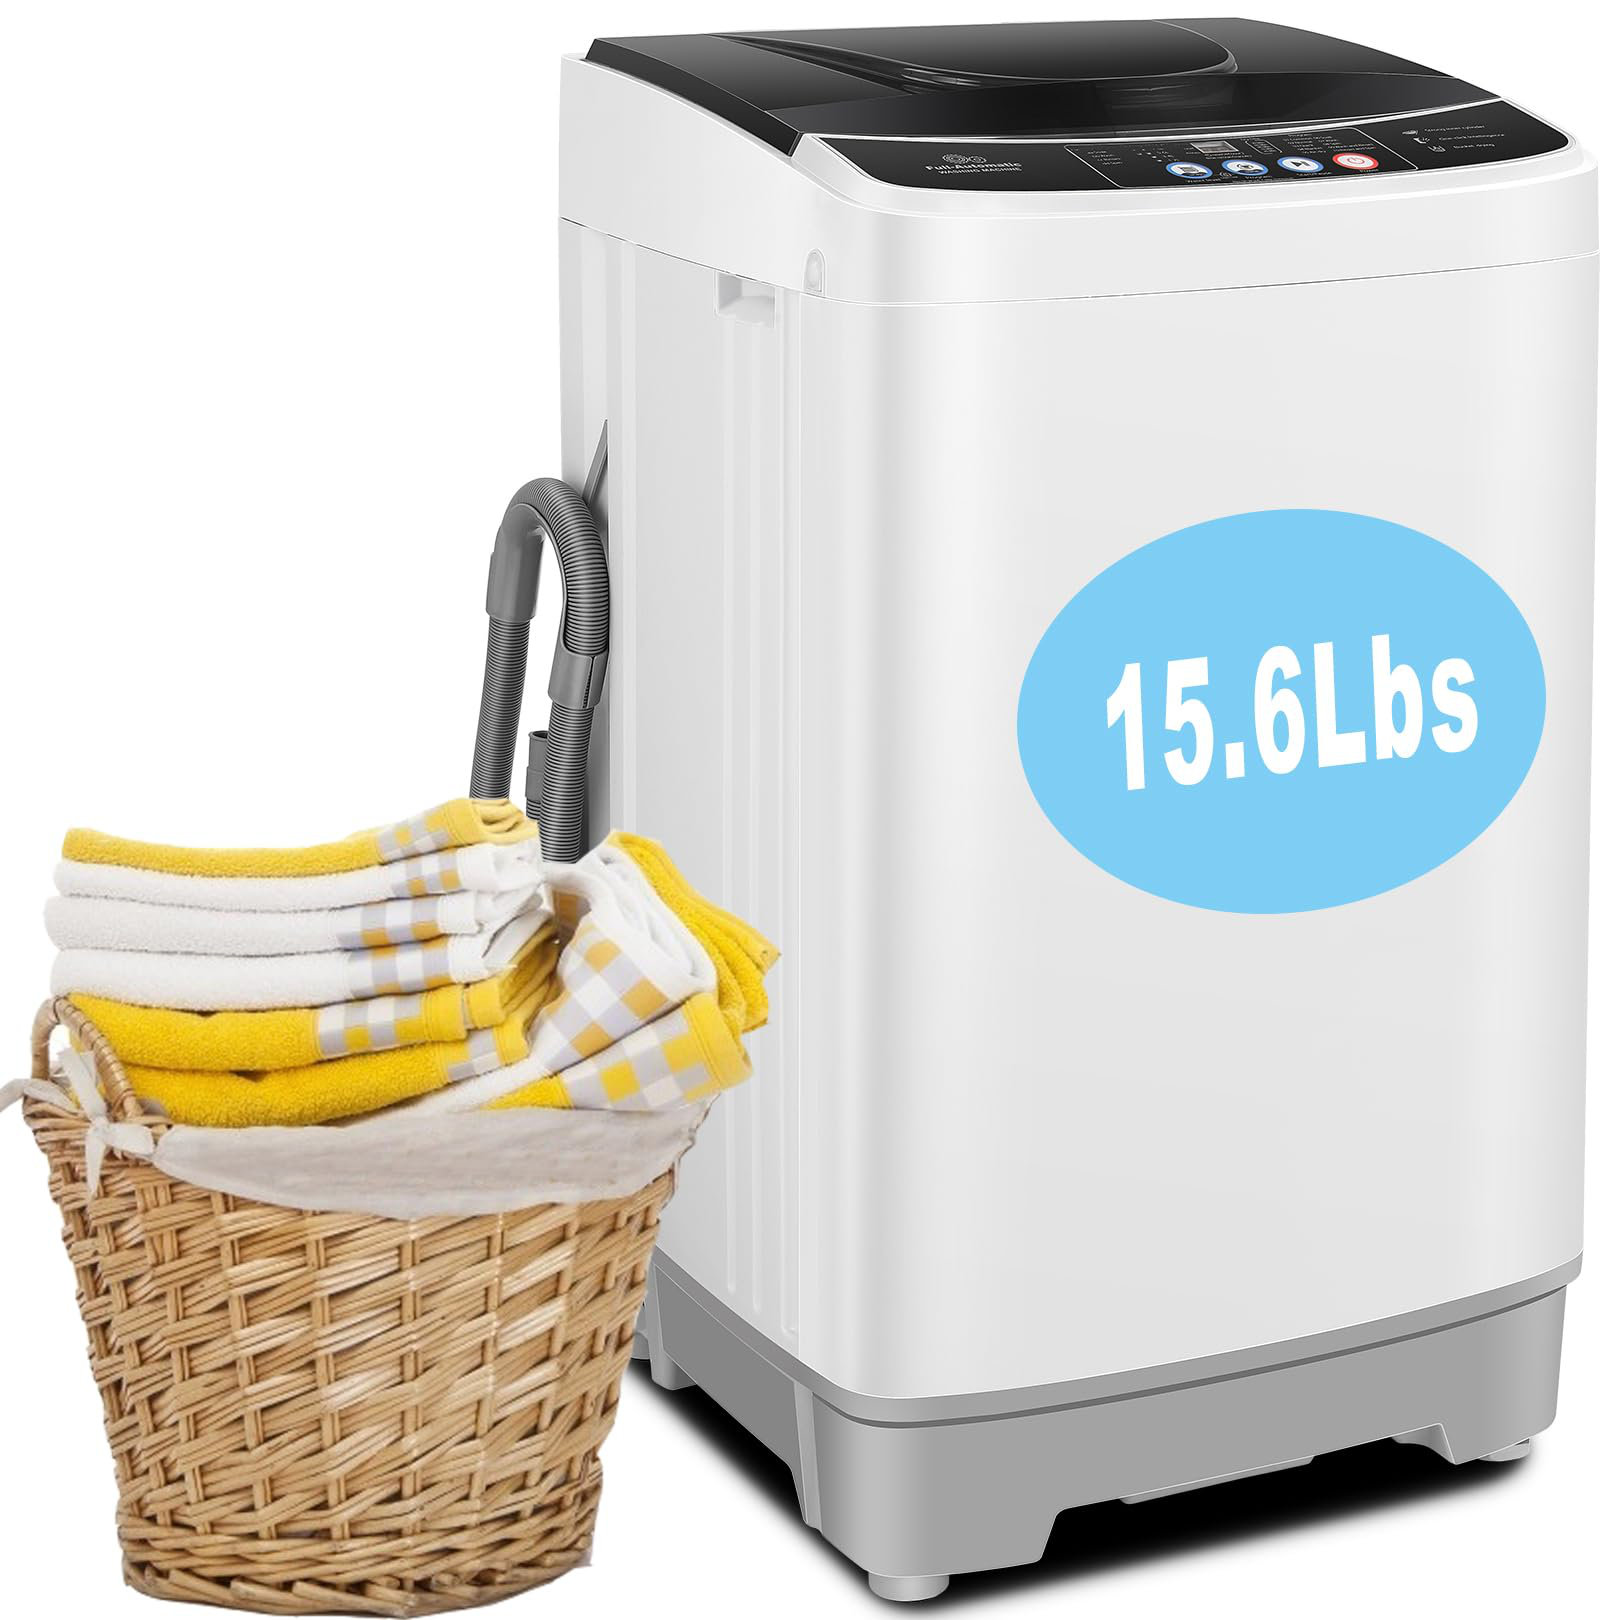  BLACK+DECKER Small Portable Washer, Washing Machine for  Household Use, Portable Washer 1.7 Cu. Ft. with 6 Cycles, Transparent Lid &  LED Display : Appliances